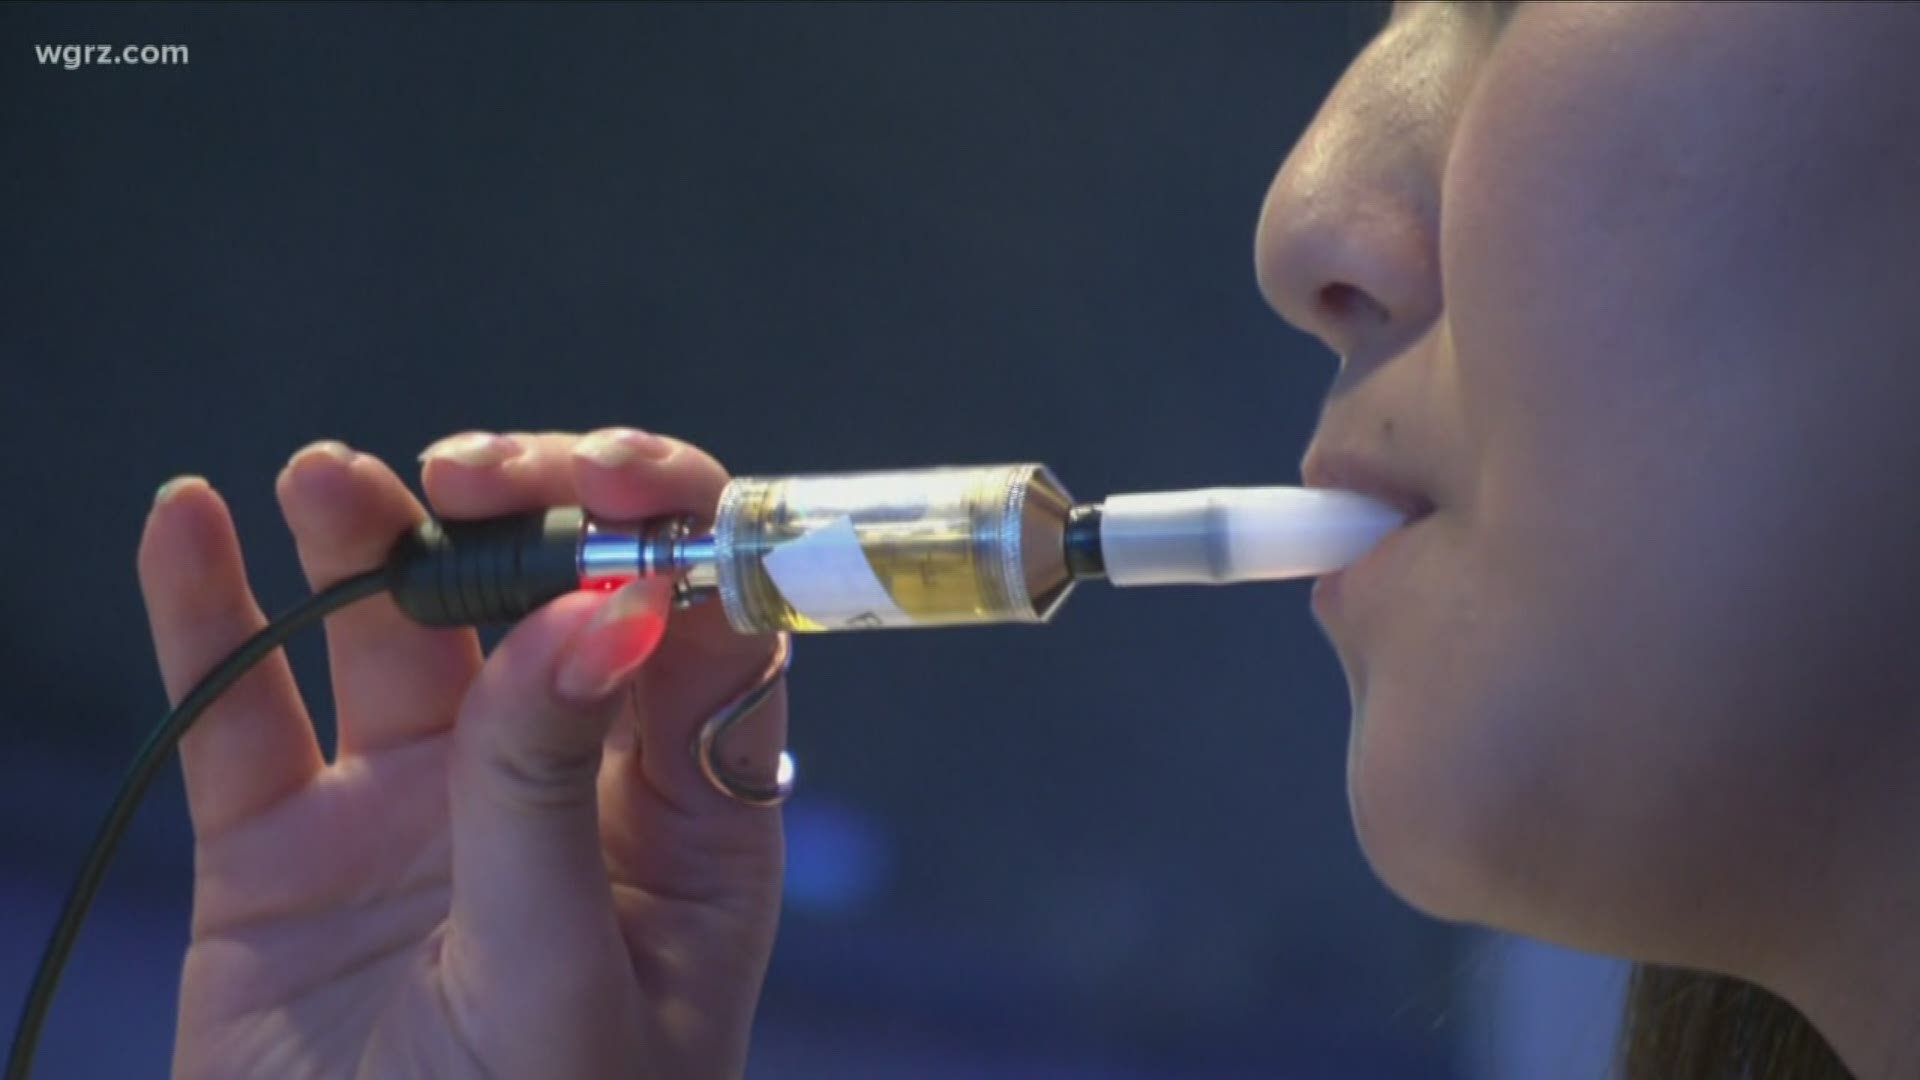 Selling flavored e-cigarettes is officially banned in New York State.